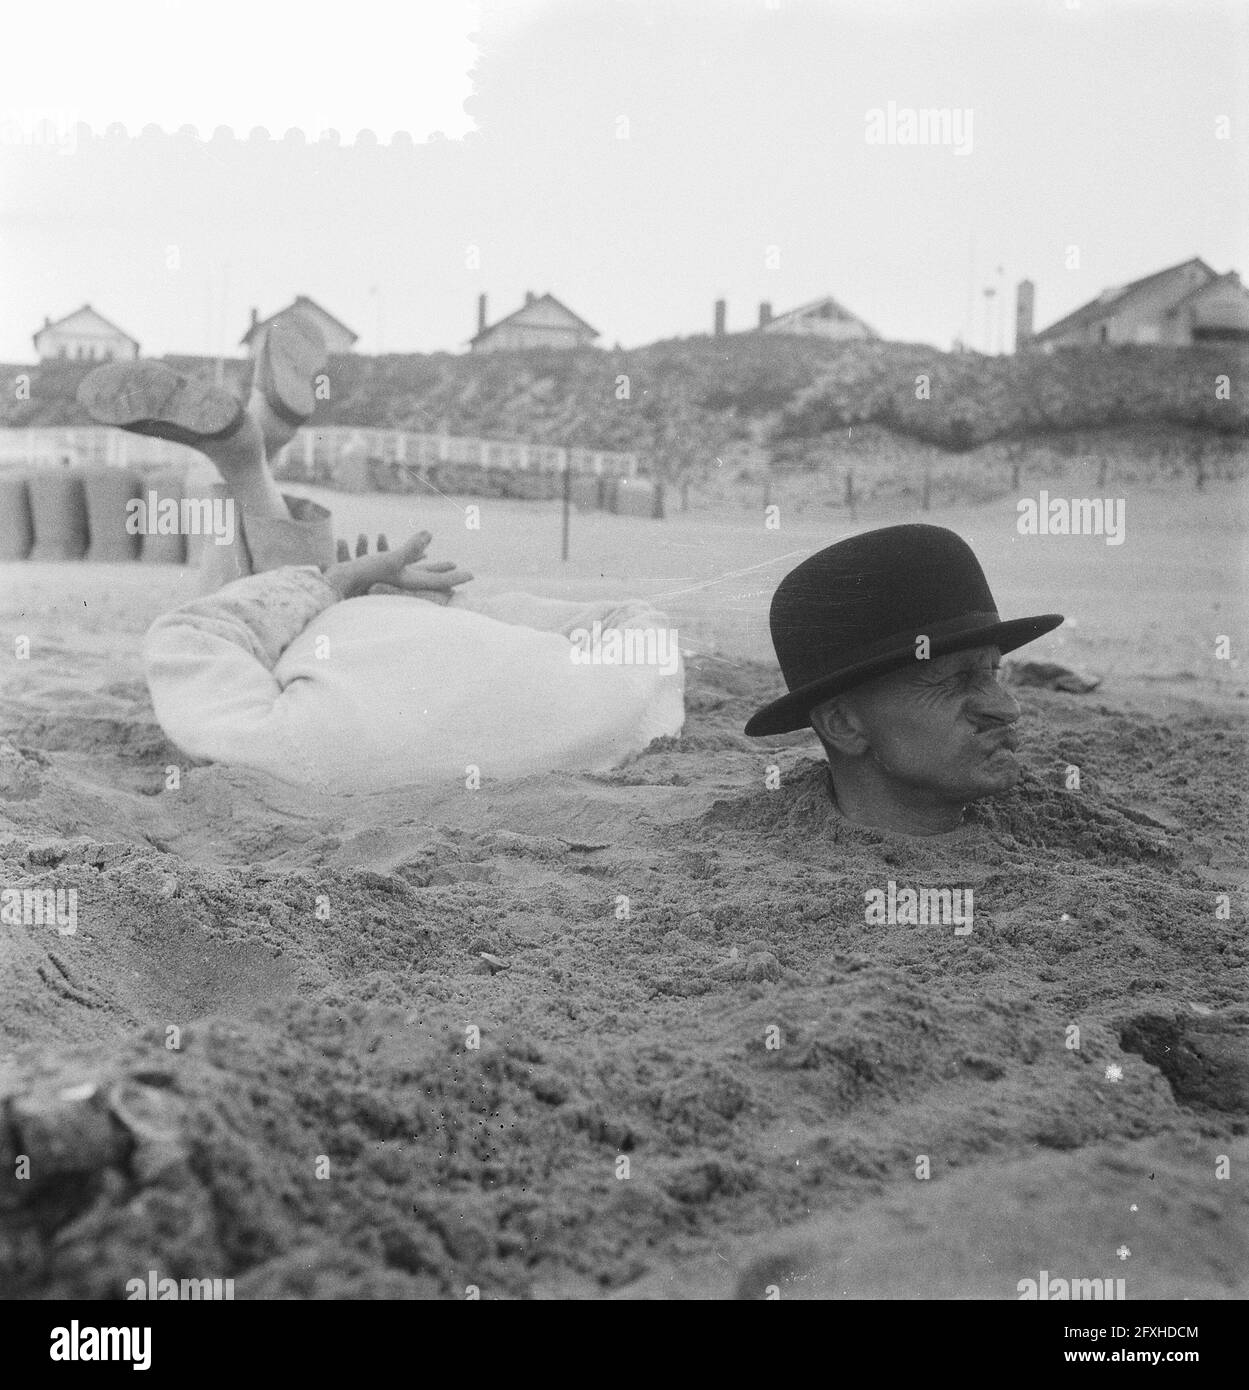 Strange situation on the Dutch beach, man with whole body in the sand, May 25, 1959, The Netherlands, 20th century press agency photo, news to remember, documentary, historic photography 1945-1990, visual stories, human history of the Twentieth Century, capturing moments in time Stock Photo